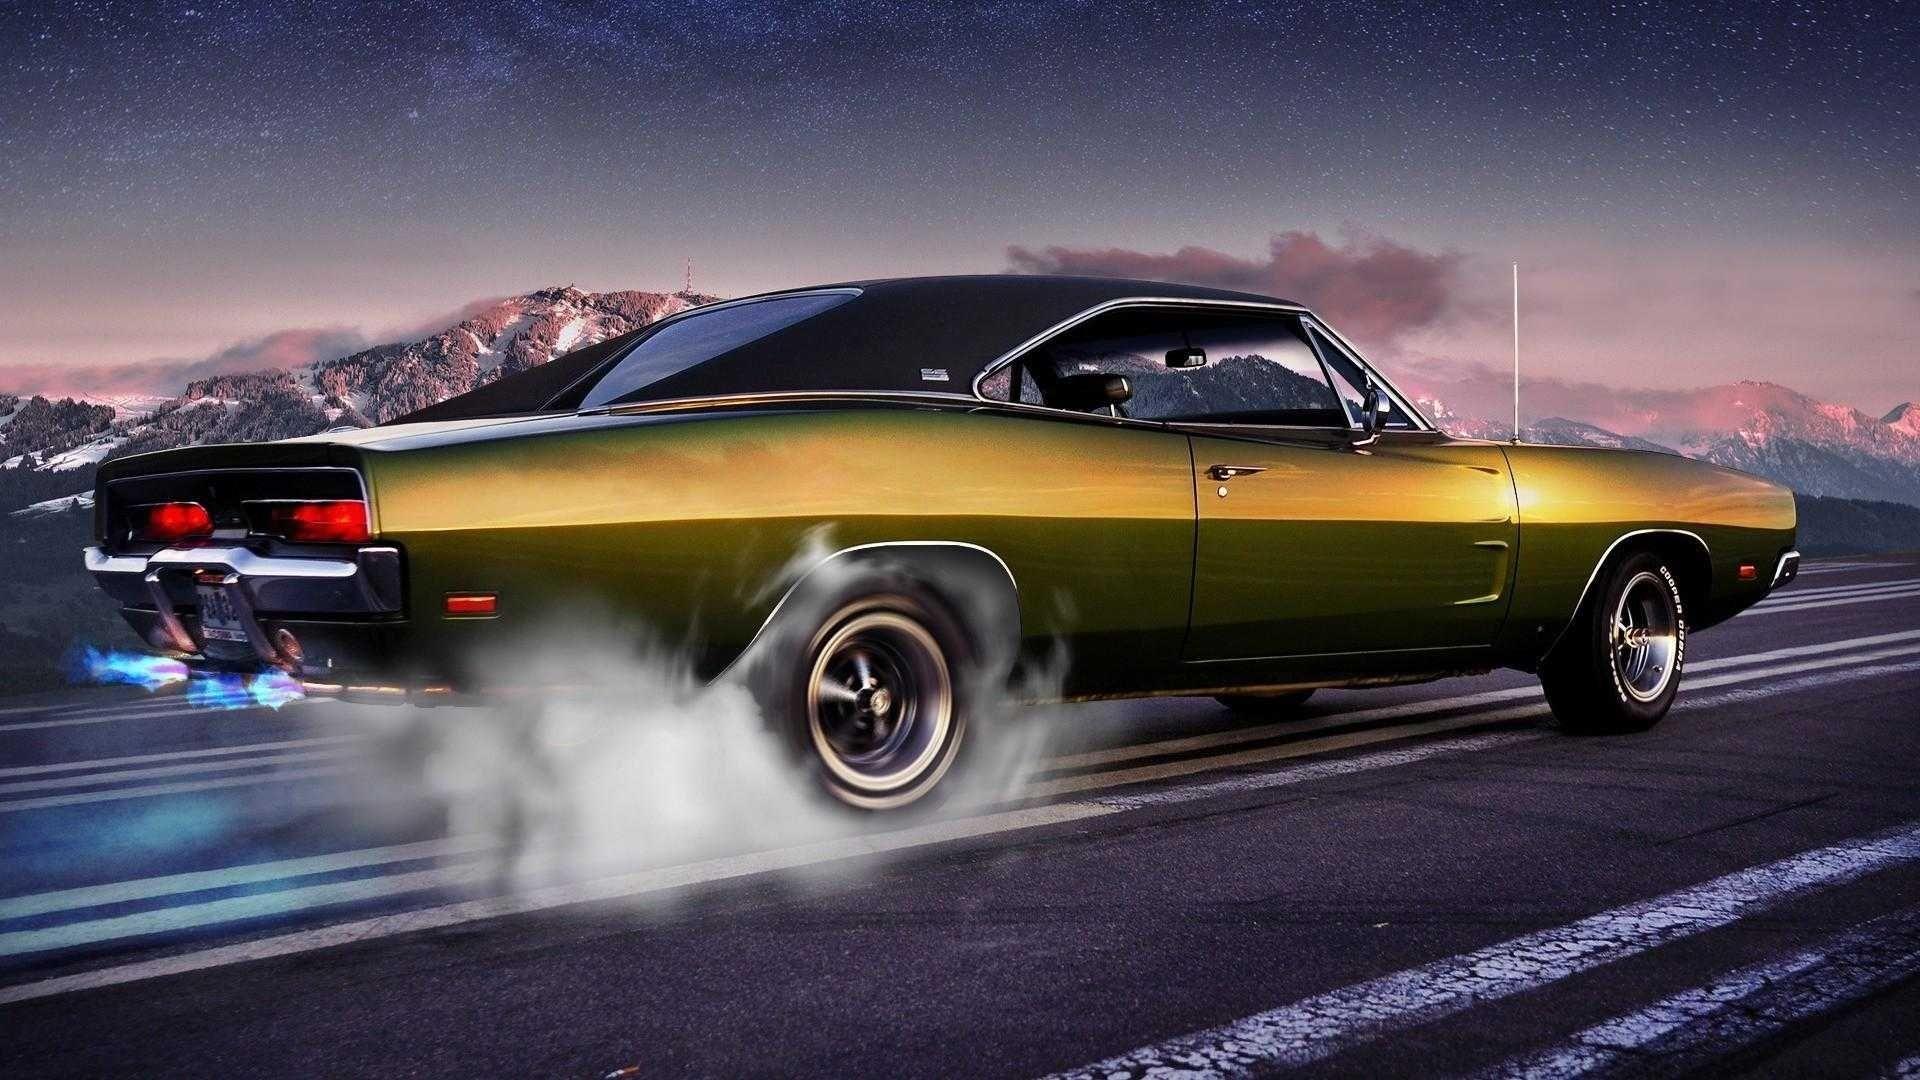 Top Classic Muscle Cars Wallpaper FULL HD 1920×1080 For PC Desktop. Old muscle cars, Classic cars muscle, Muscle cars